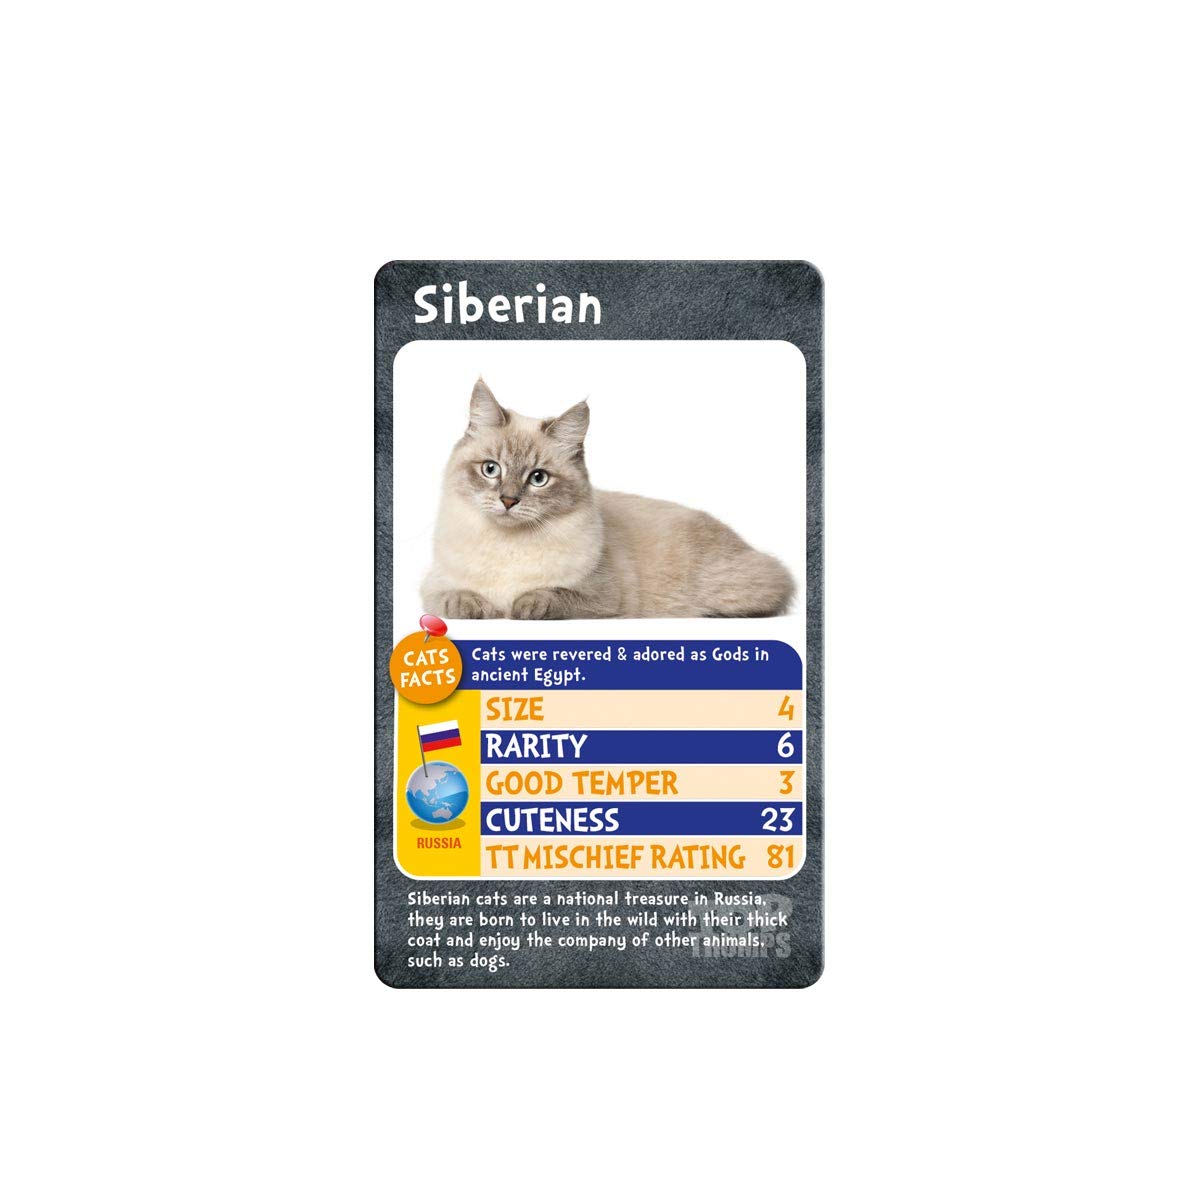 Cats and Kittens Top Trumps Card Game